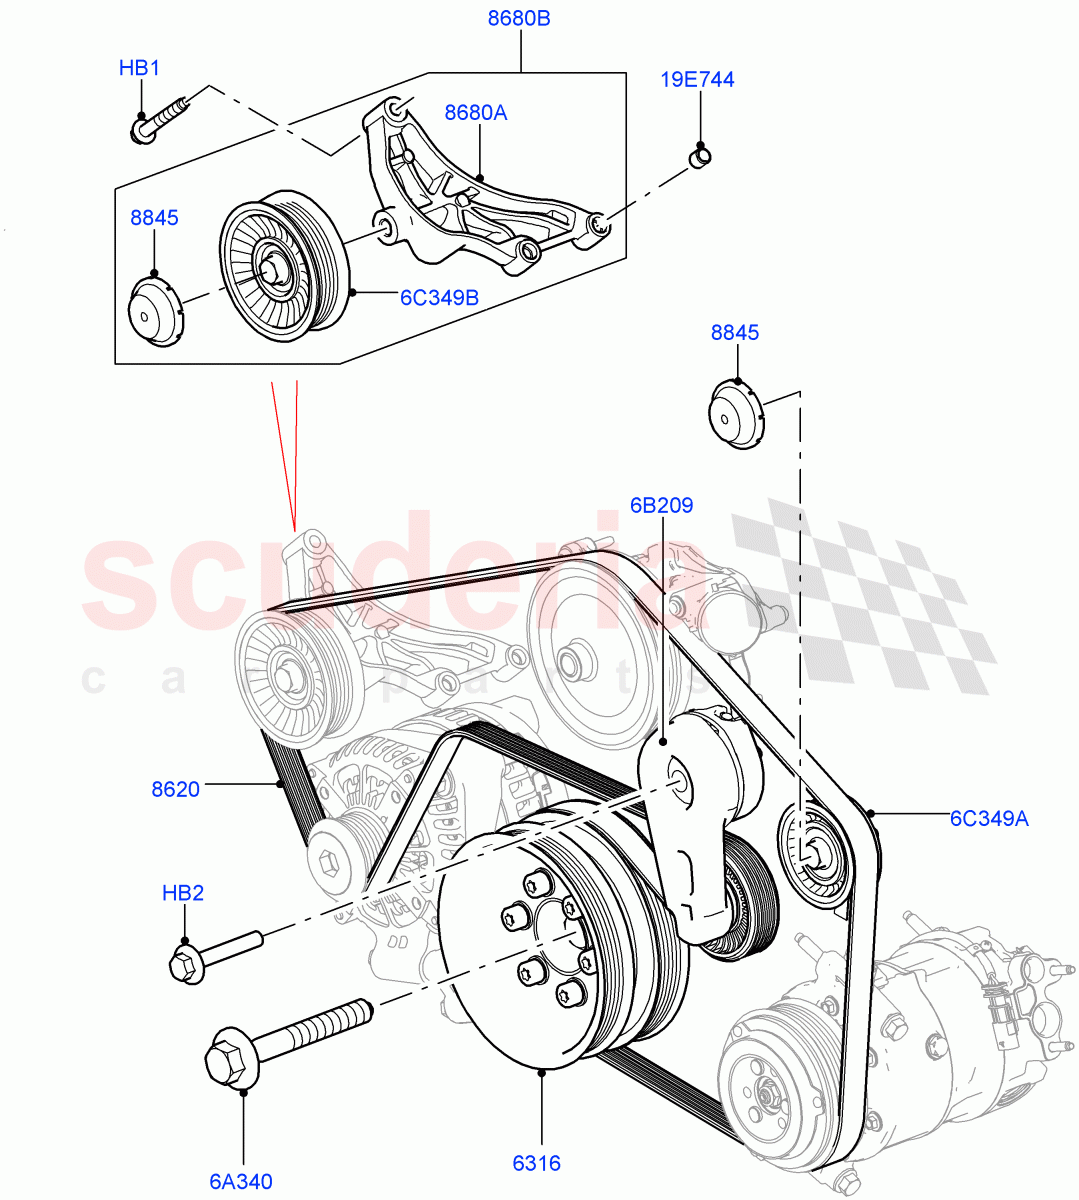 Pulleys And Drive Belts(Solihull Plant Build, Primary Drive)(3.0L DOHC GDI SC V6 PETROL)((V)FROMEA000001) of Land Rover Land Rover Range Rover Sport (2014+) [3.0 DOHC GDI SC V6 Petrol]